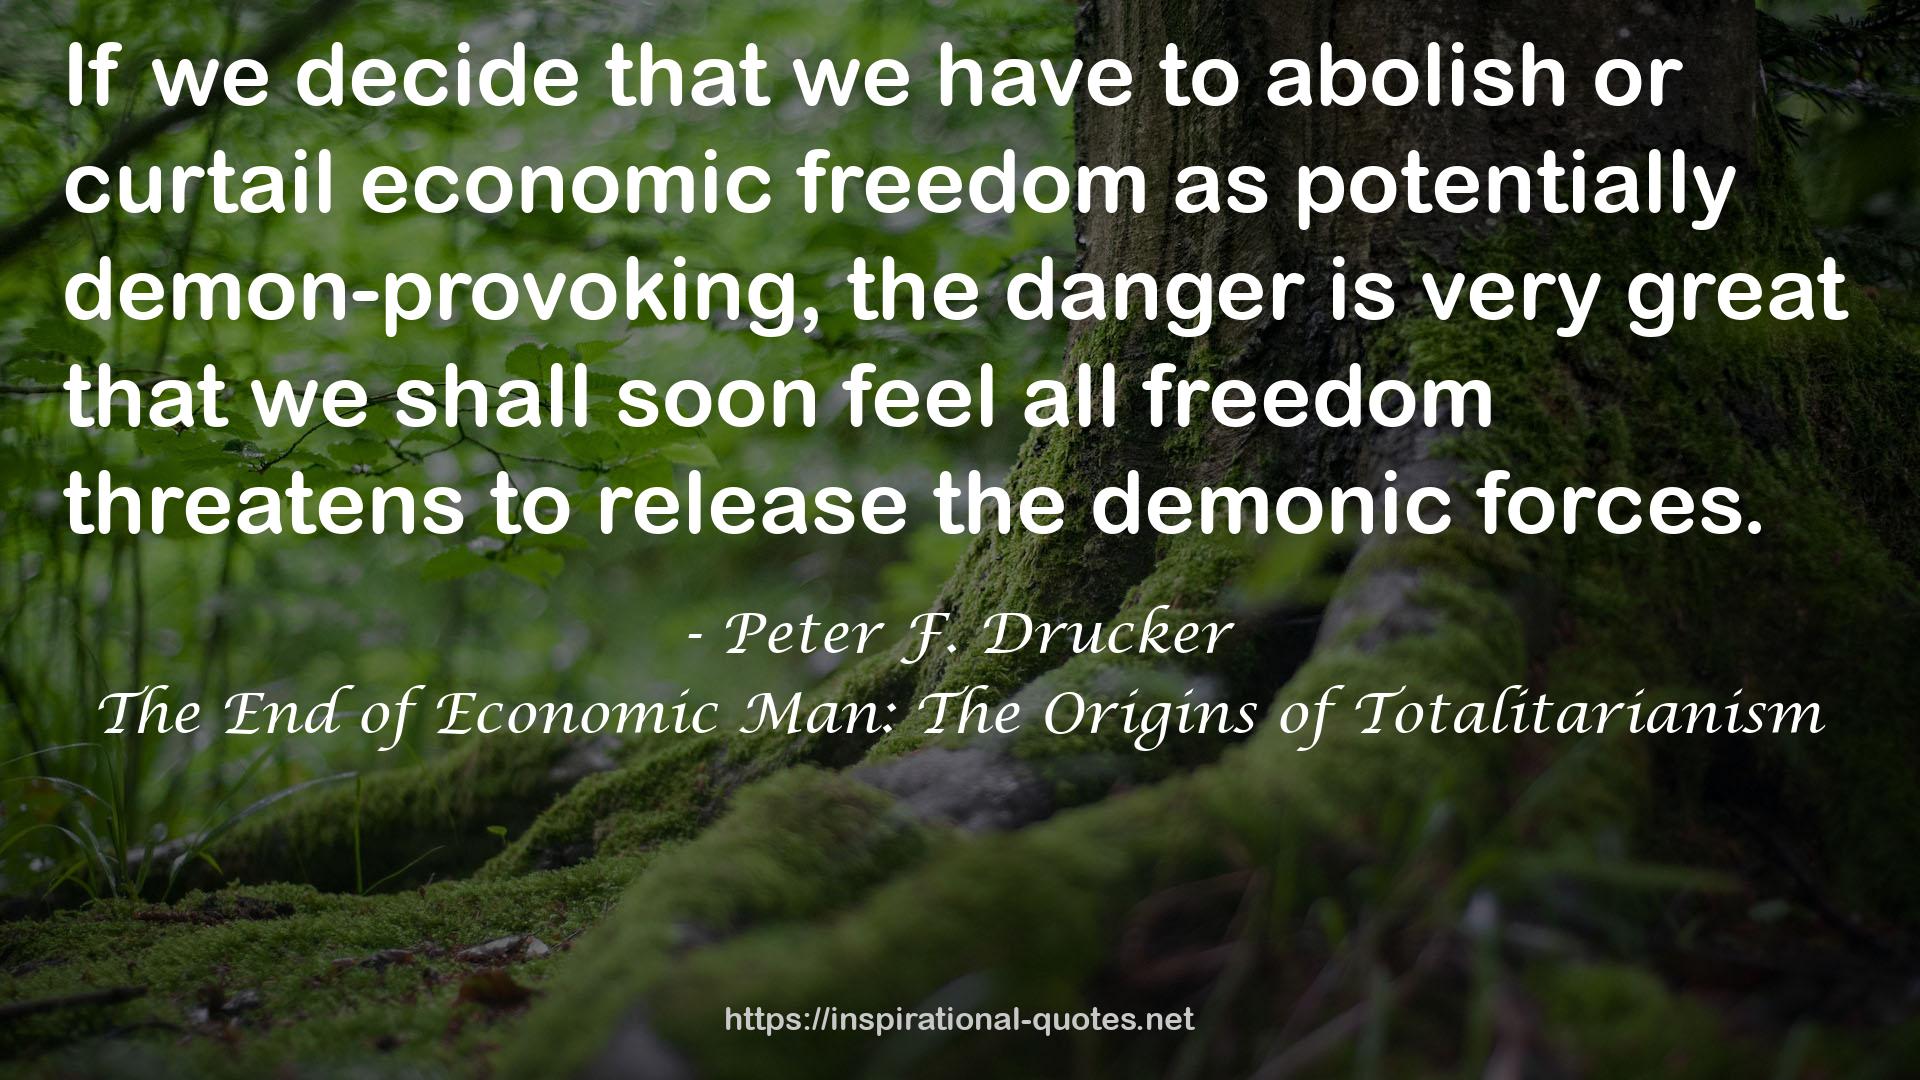 The End of Economic Man: The Origins of Totalitarianism QUOTES